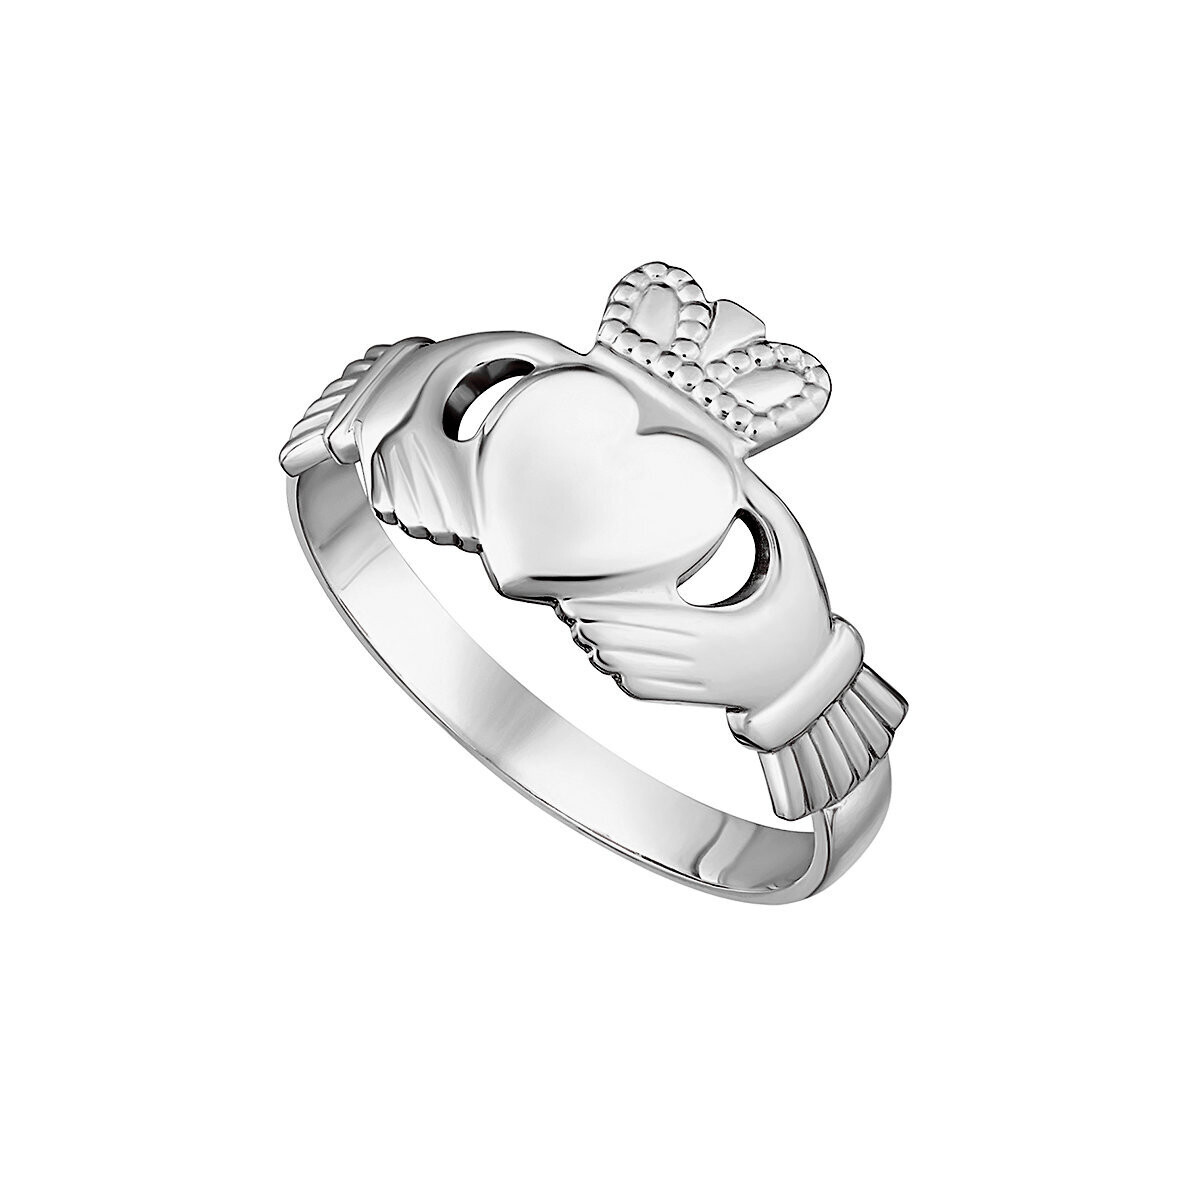 Ladies Claddagh Ring- Sterling Silver- Our Standard Silver Ladies Claddagh Ring